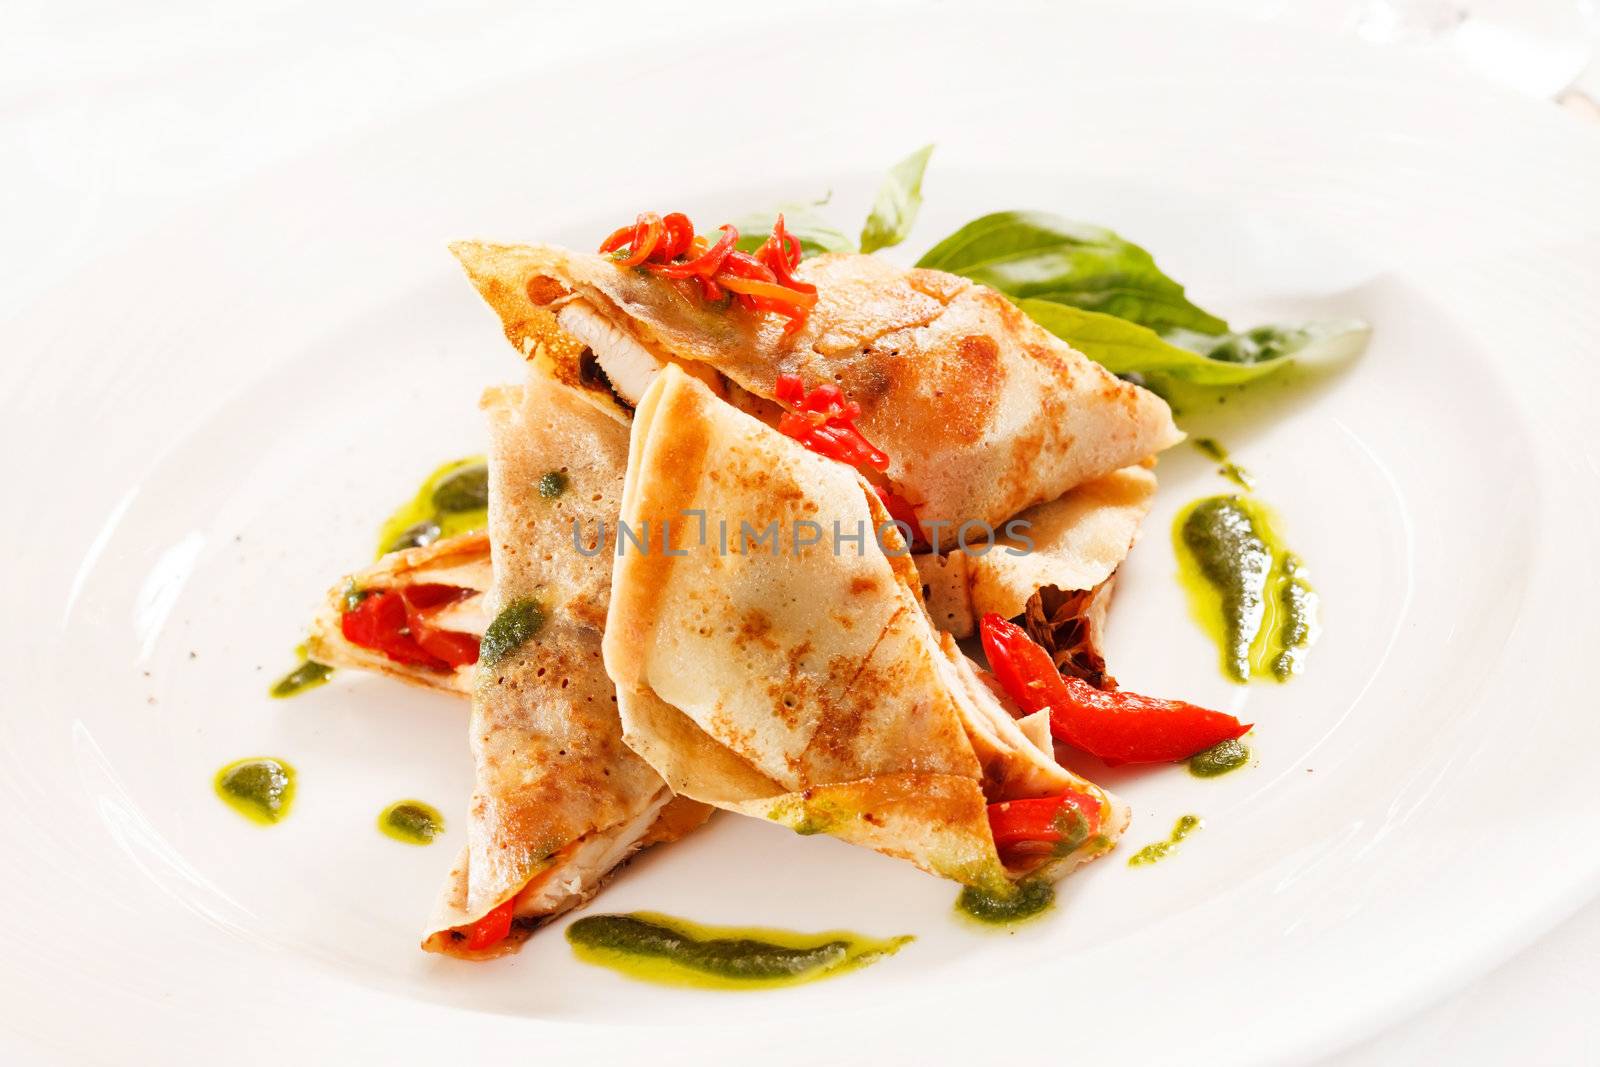 crepes with chicken and vegetables by shebeko